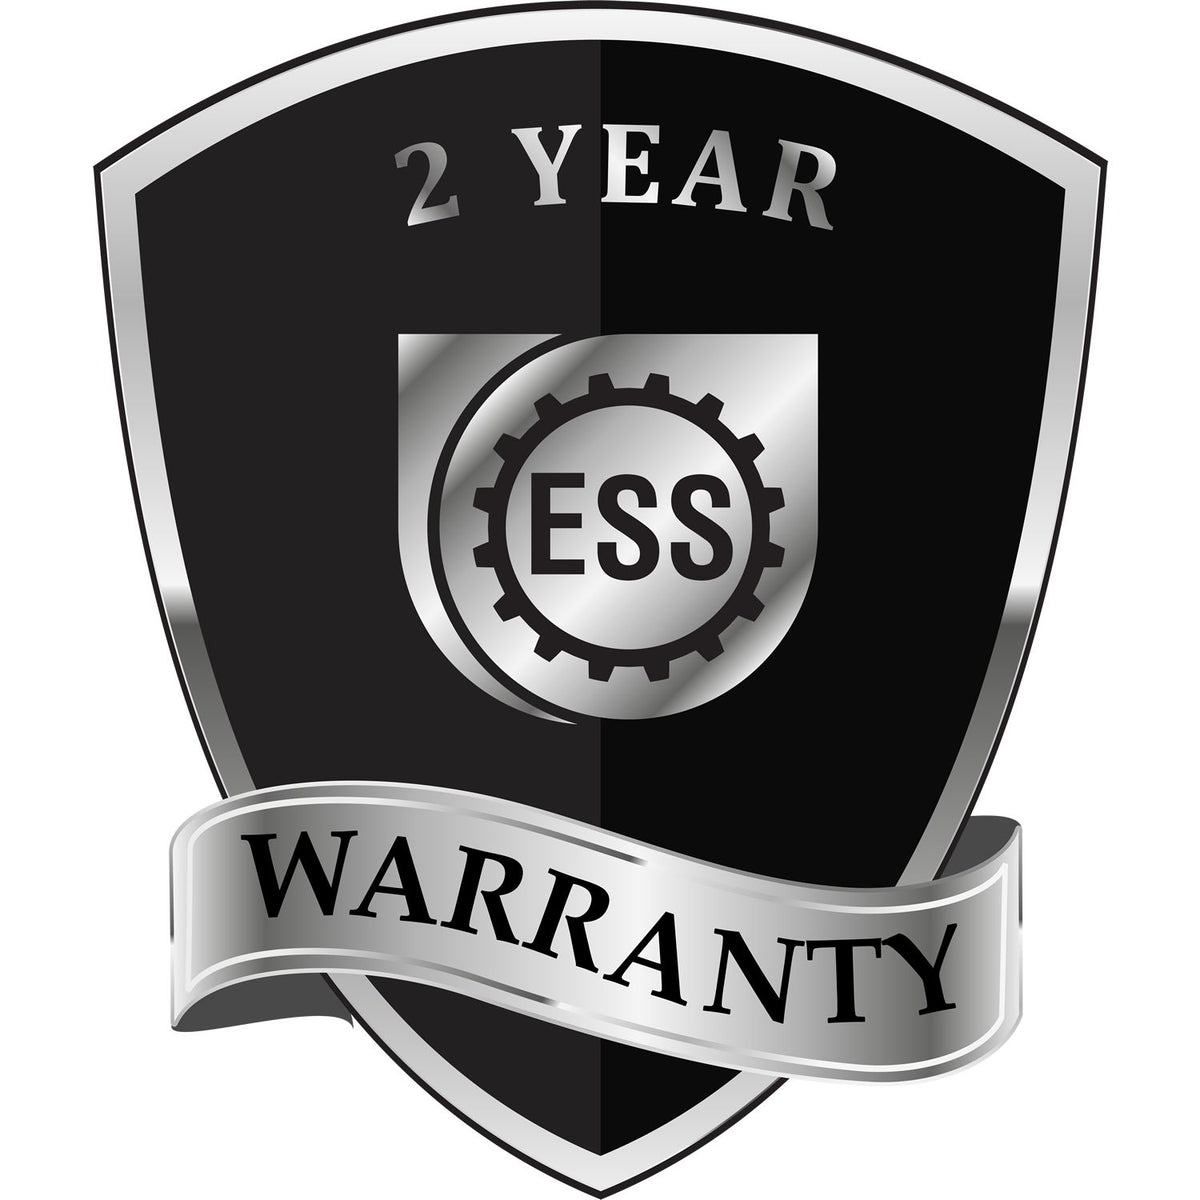 A badge or emblem showing a warranty icon for the Extended Long Reach New Hampshire Architect Seal Embosser